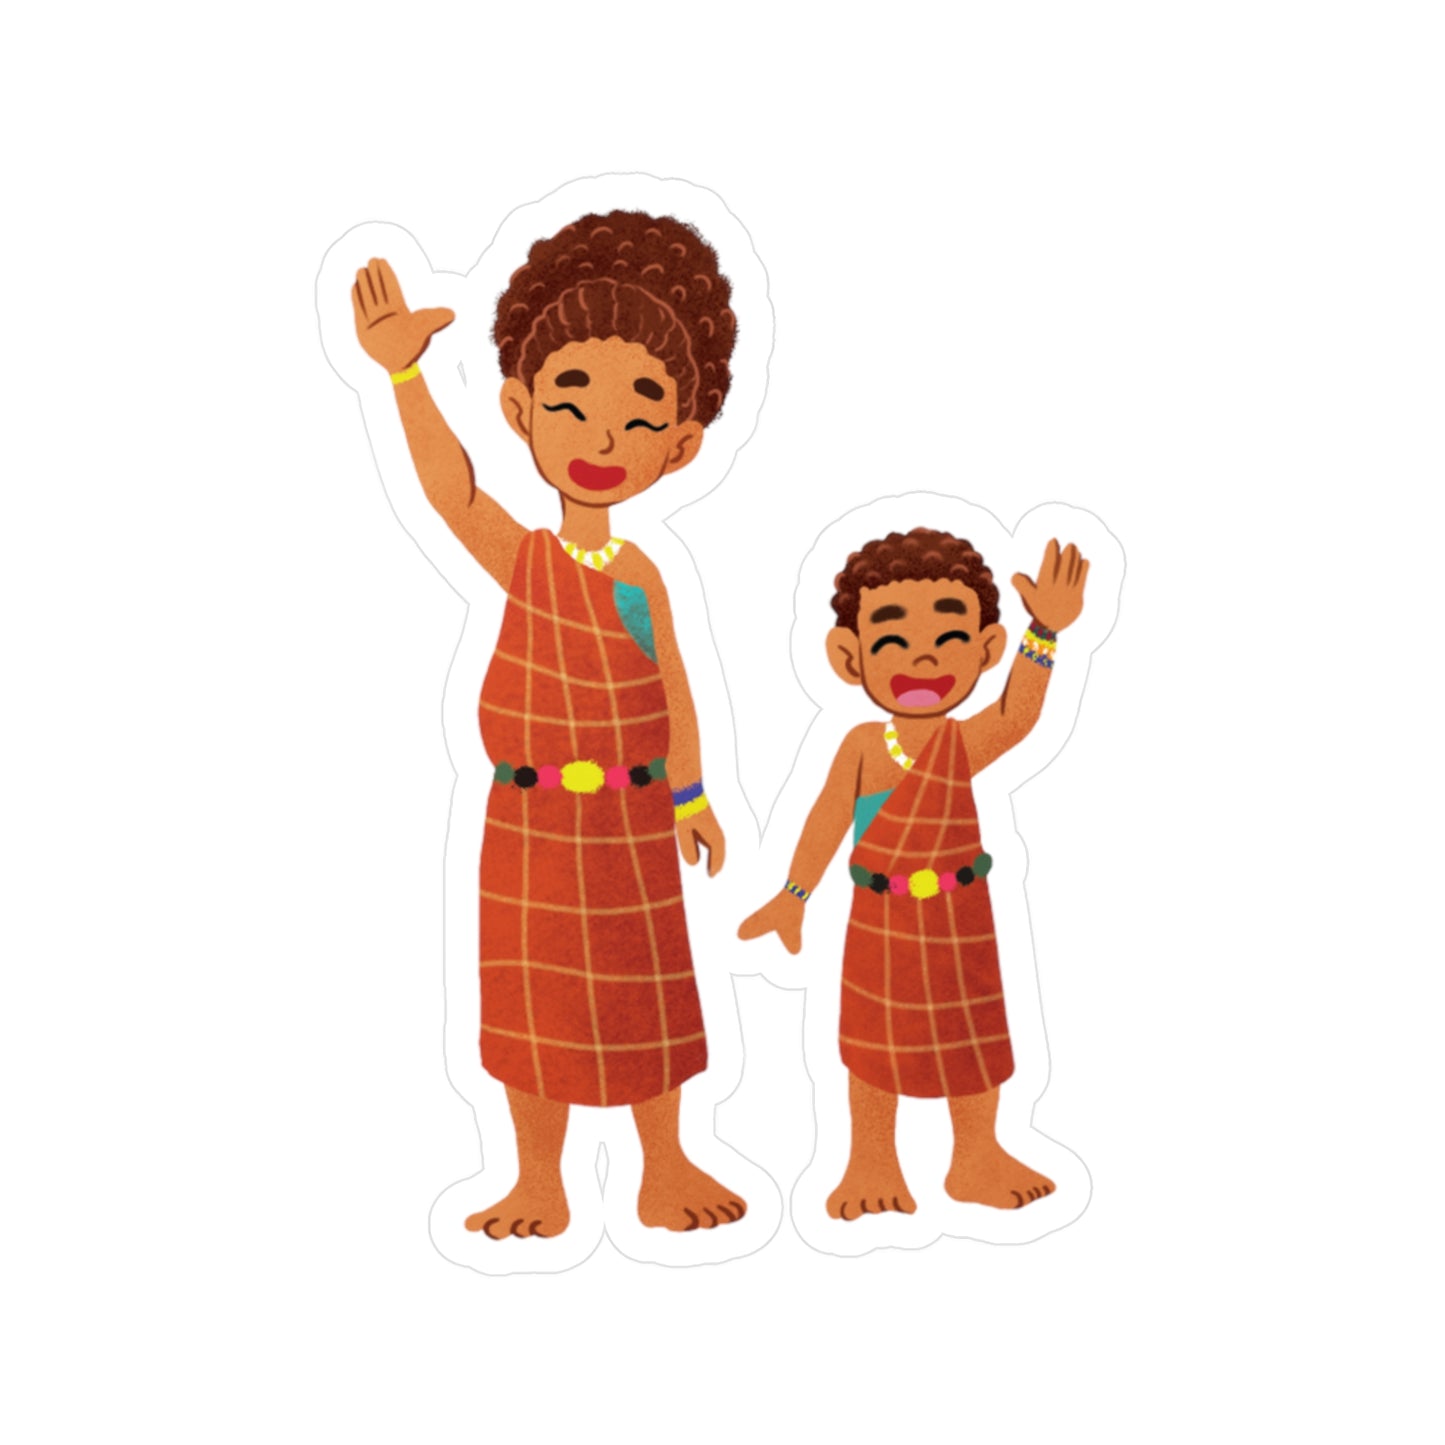 Stickers of Yaro the Maasai Village Boy and his Mother Waving Goodbye | Die-Cut Maasai Family Stickers | Outdoor and Indoor Stickers | Water-resistant Stickers